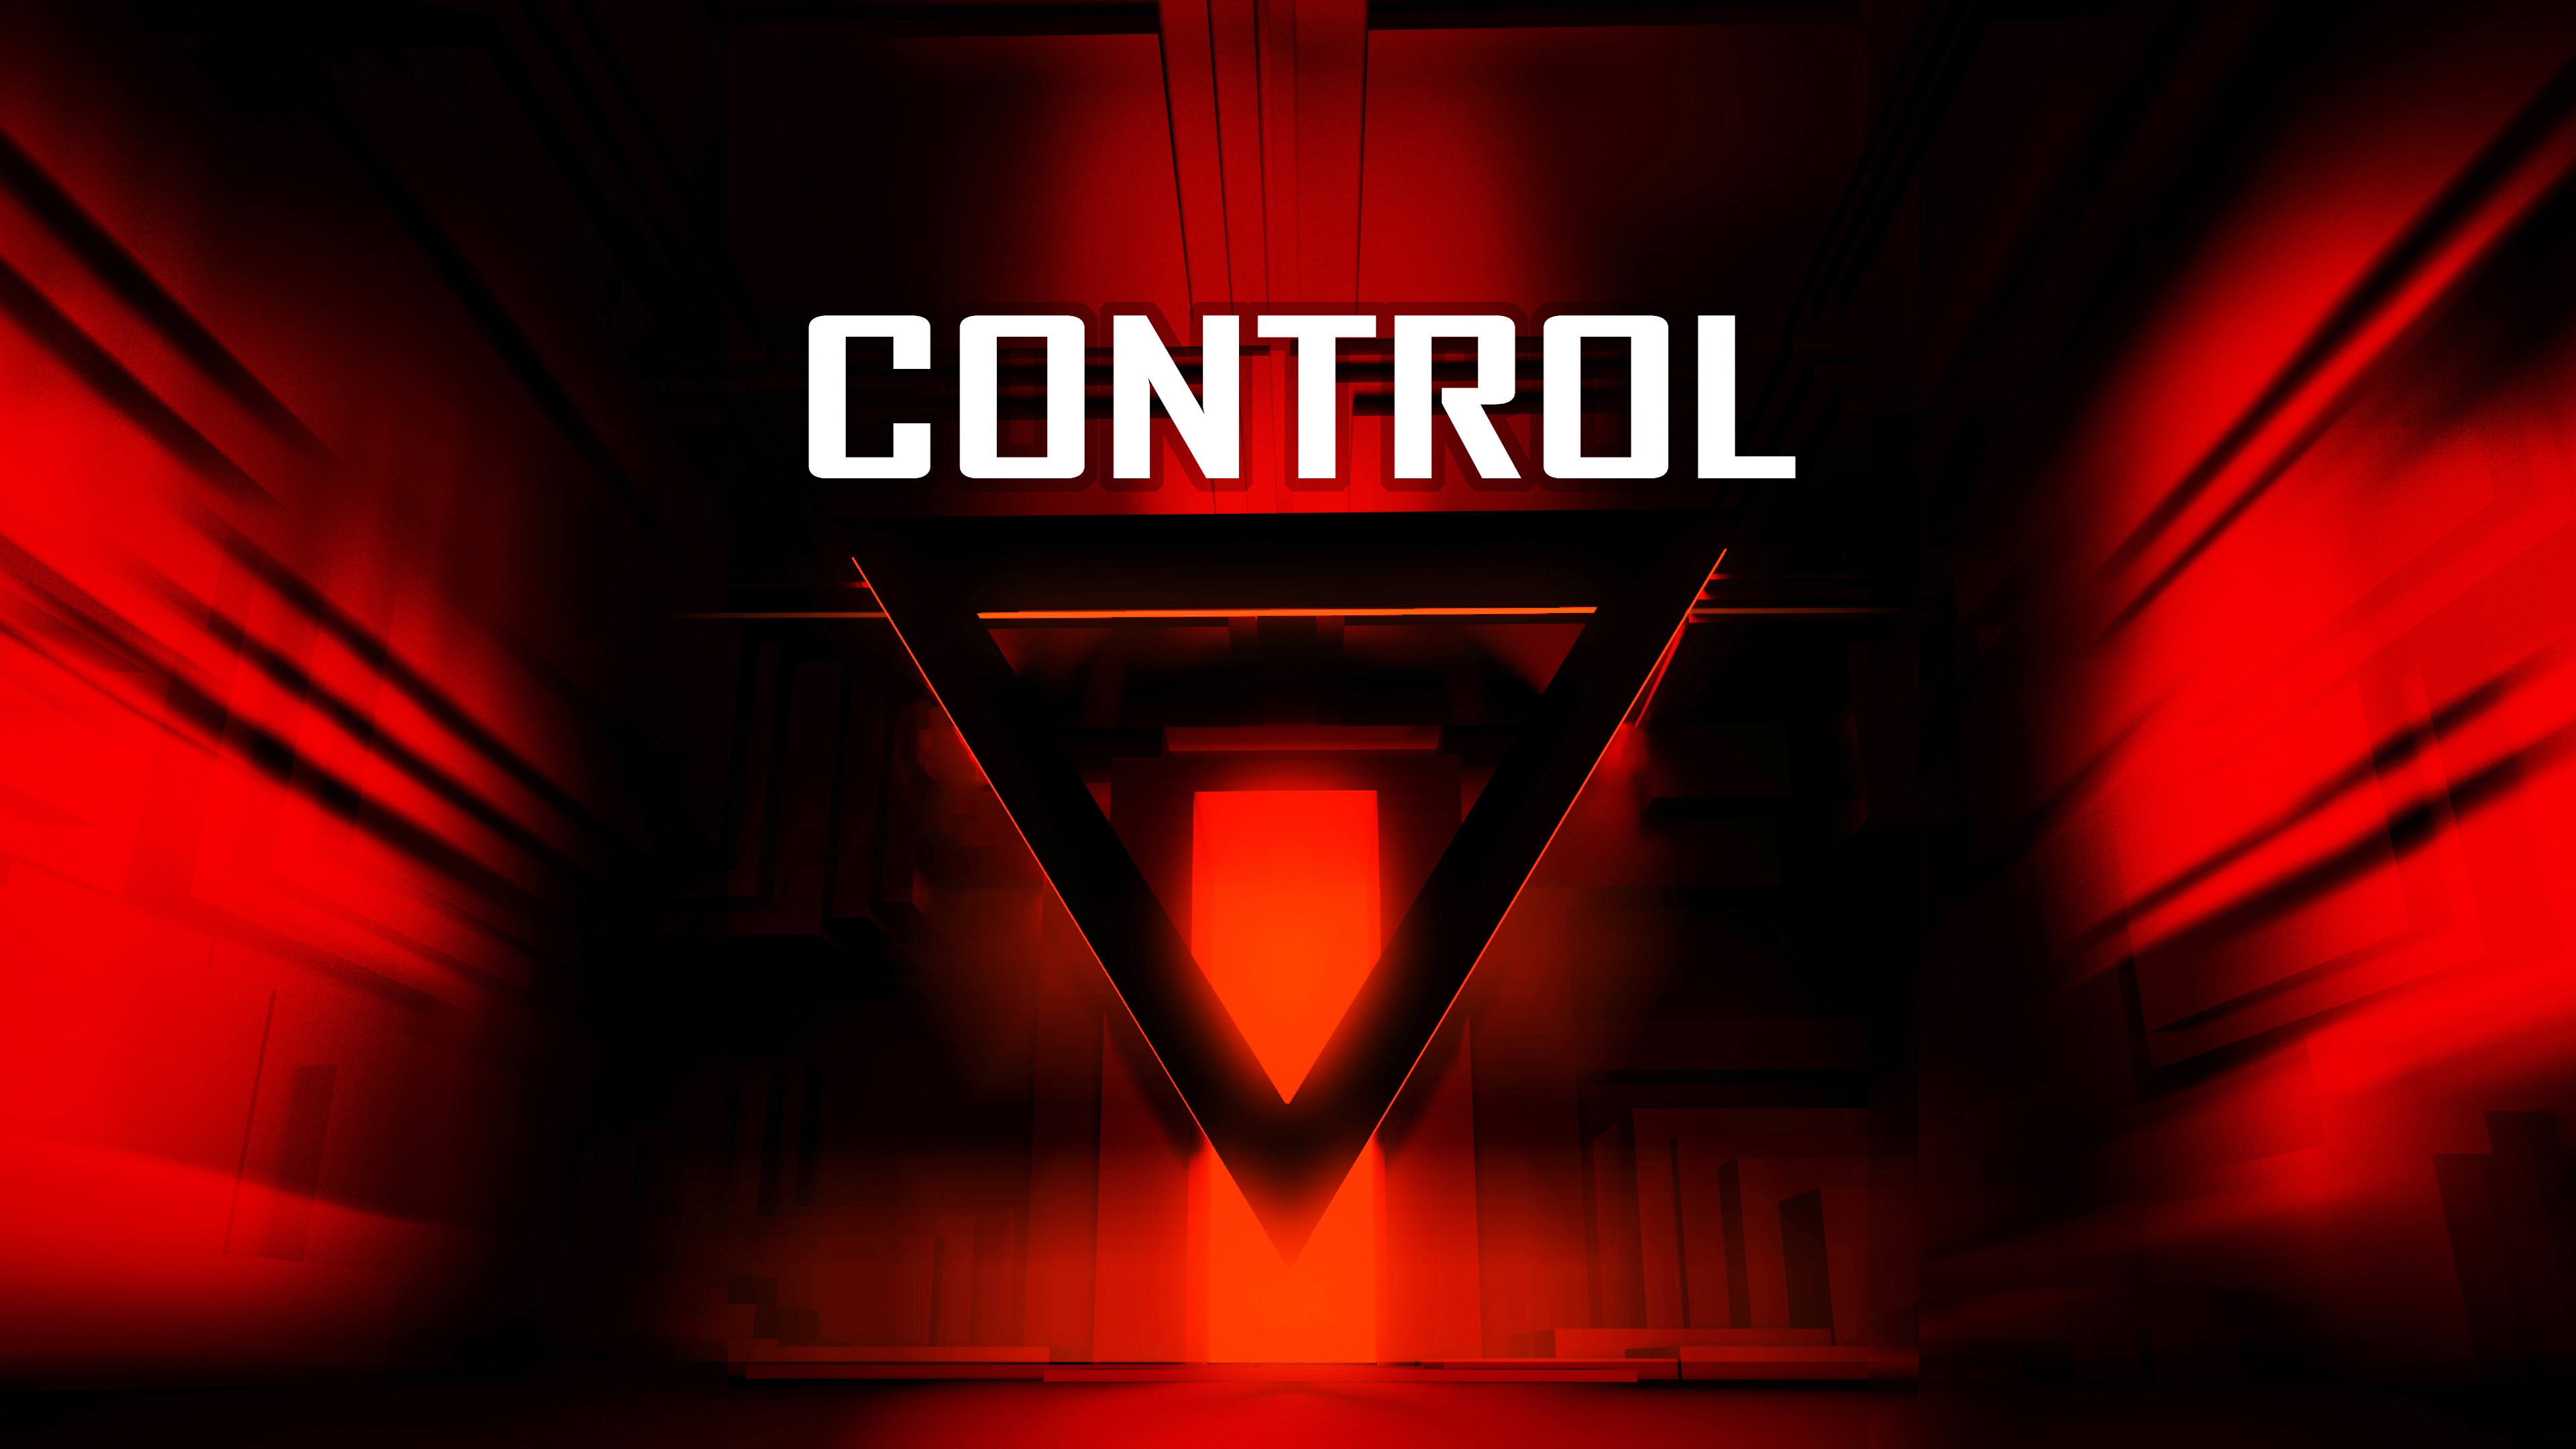  Control  Game  Wallpaper  HD Games  4K  Wallpapers  Images 